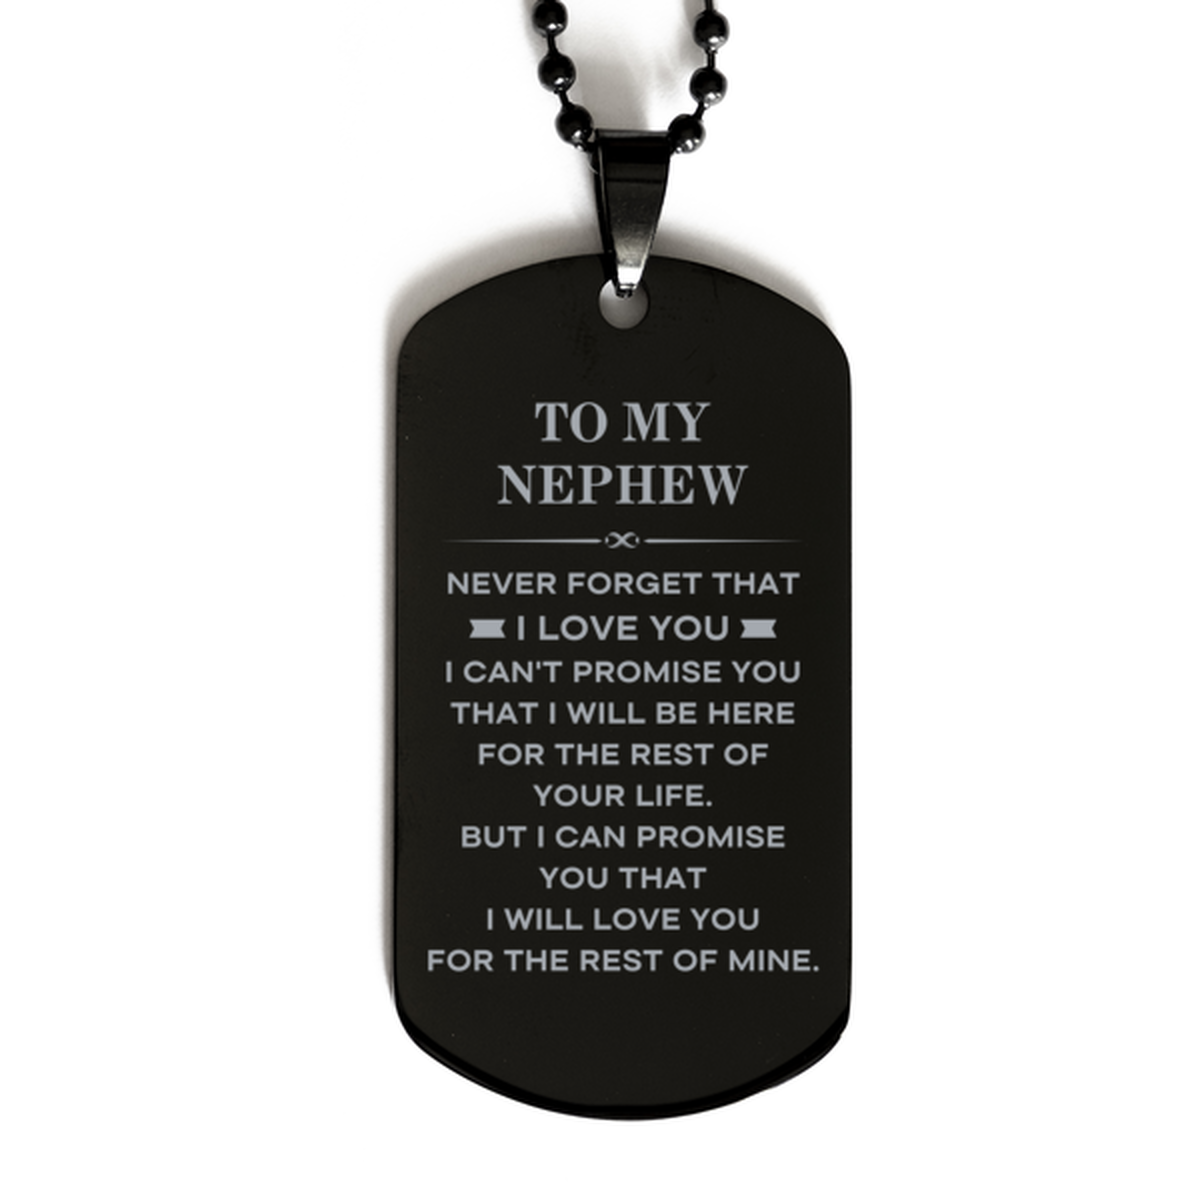 To My Nephew Gifts, I will love you for the rest of mine, Love Nephew Dog Tag Necklace, Birthday Christmas Unique Black Dog Tag For Nephew